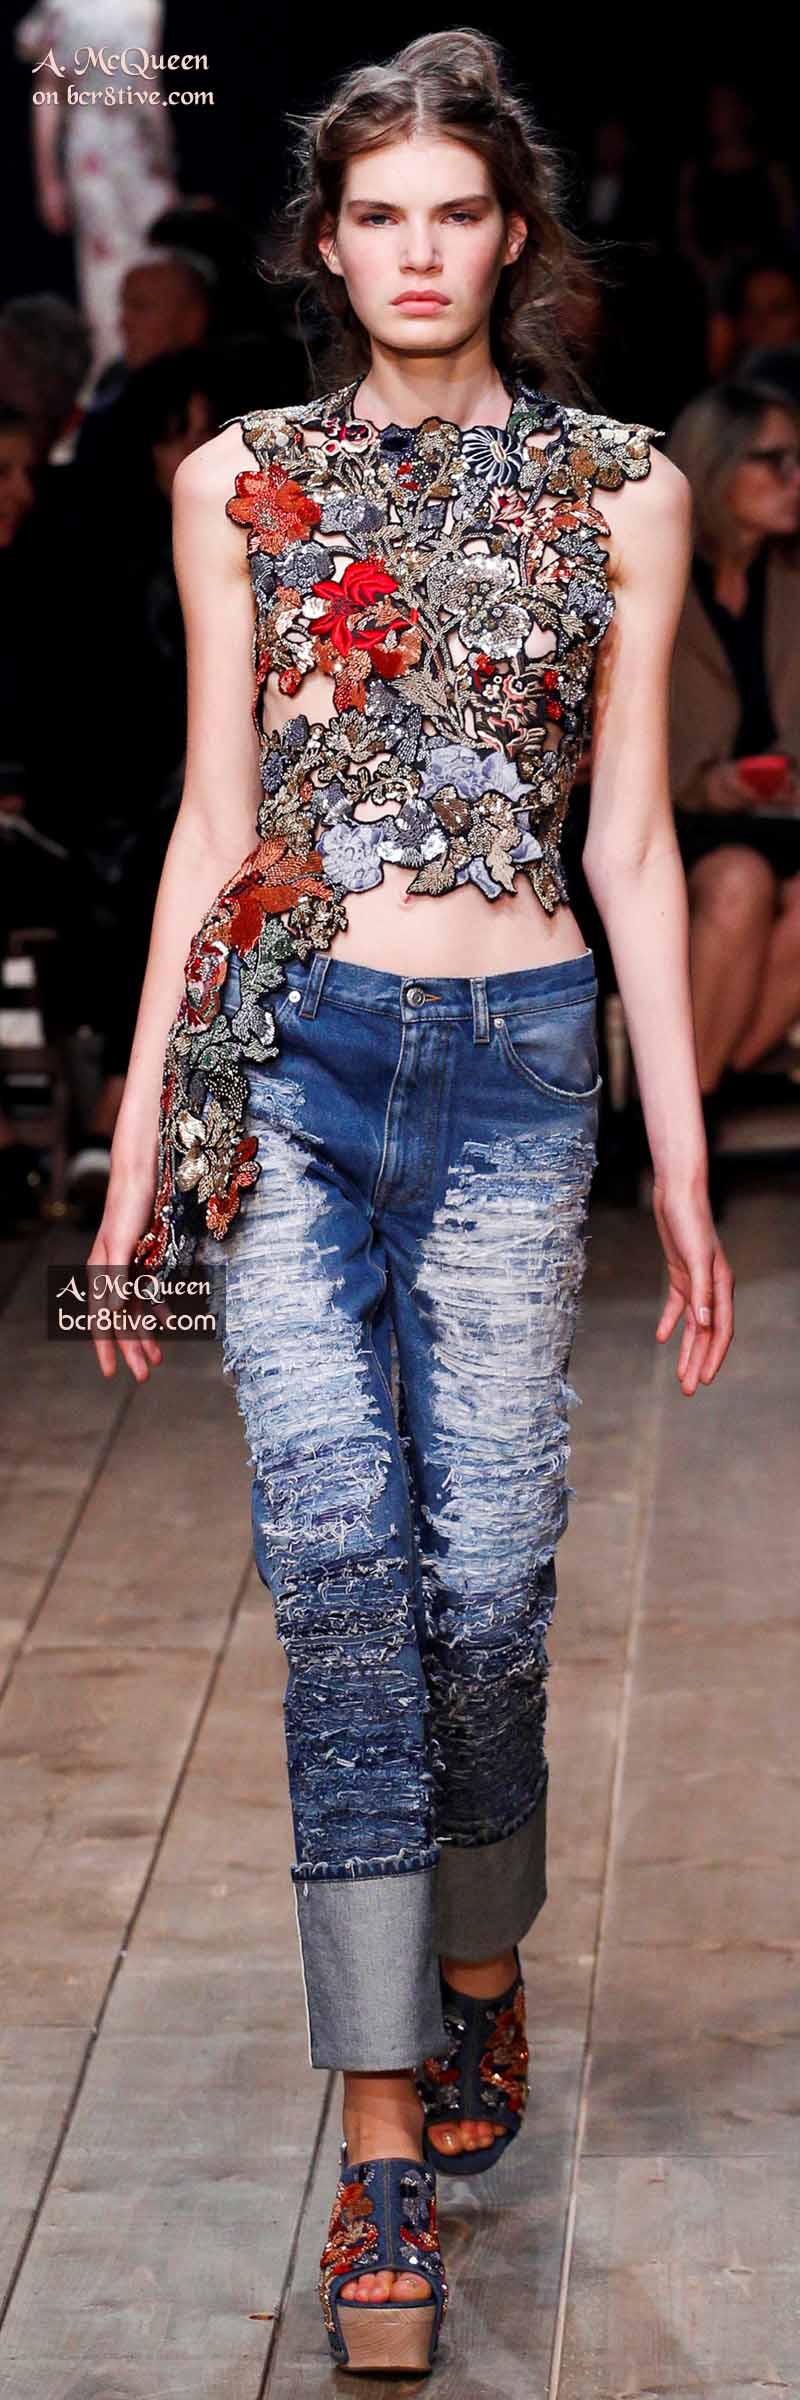 Embroidered Top and Waxed Effect Denim Pants - The Best of Alexander McQueen 2016